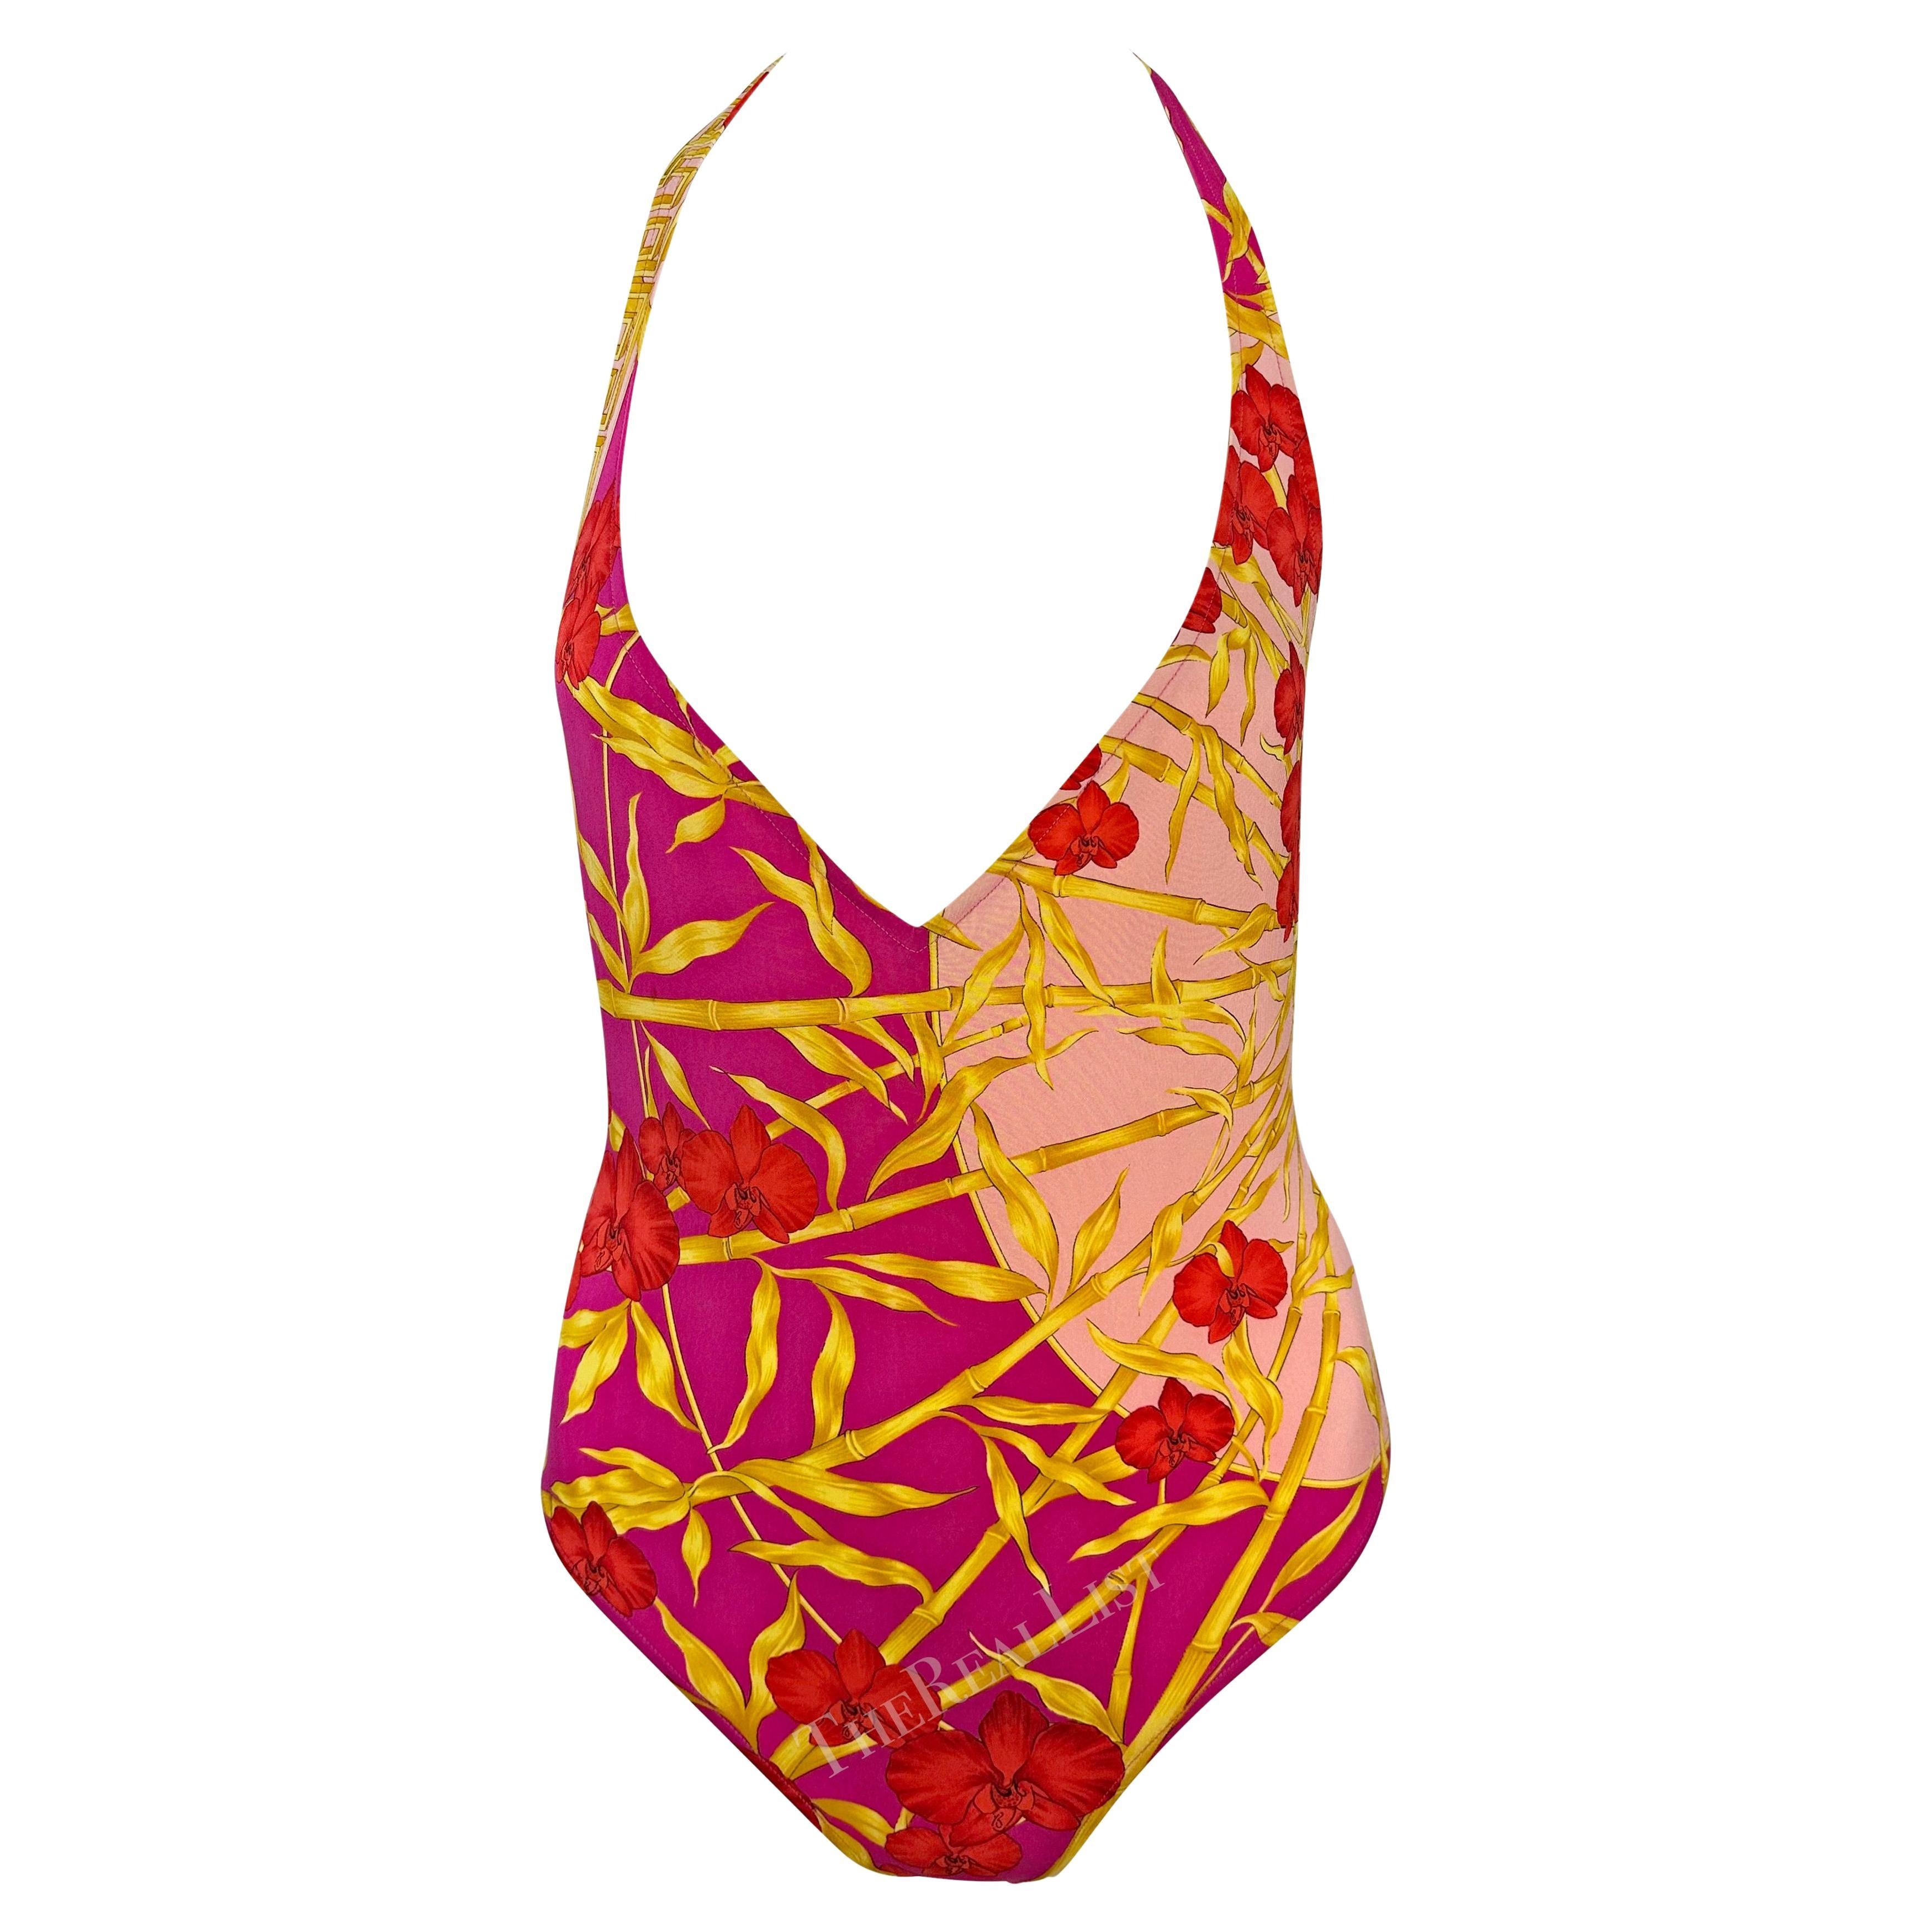 S/S 2000 Versace by Donatella Hot Pink Bamboo Plunging Halter One-Piece Swimsuit For Sale